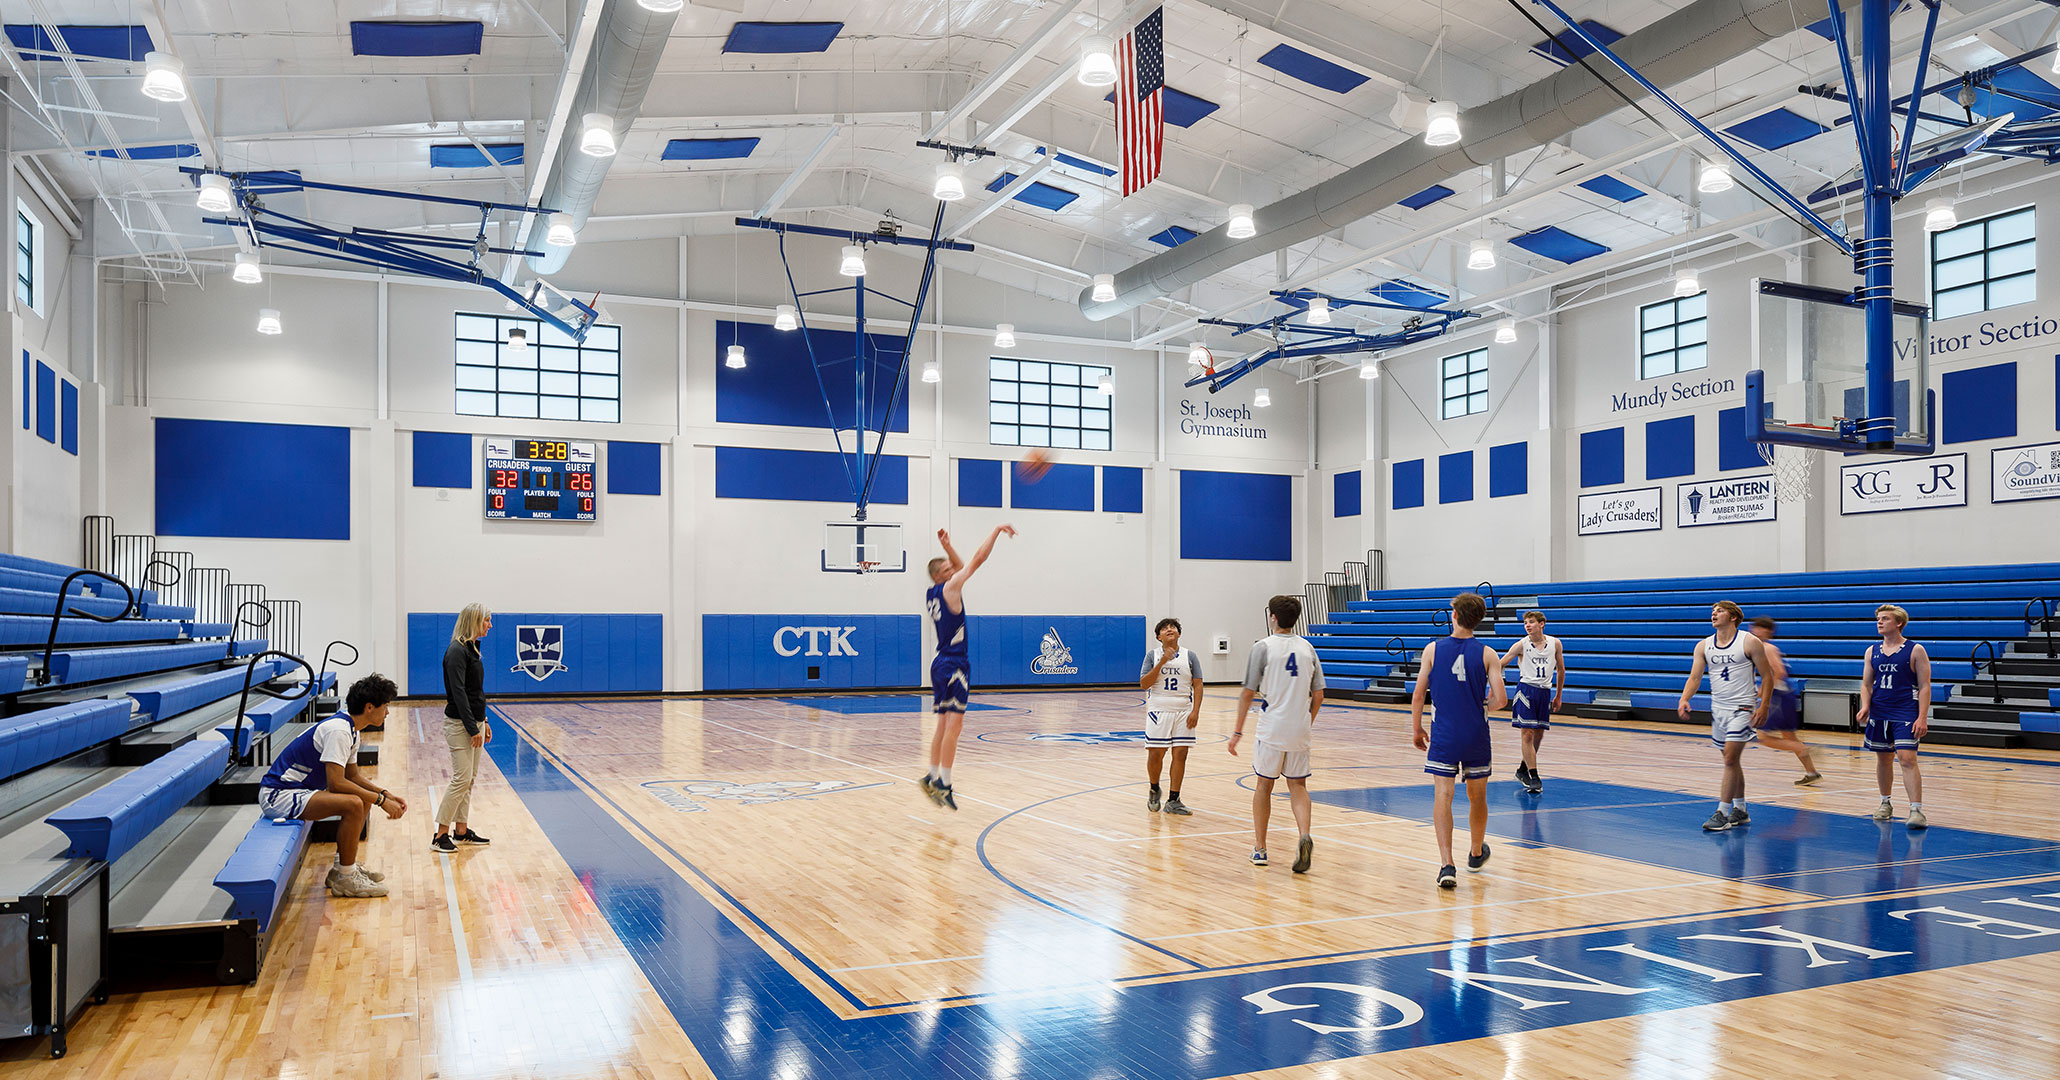 The Charlotte Diocese and Christ the King Catholic High School worked with Boudreaux master planners and architects to design the school’s athletics center and volleyball courts.